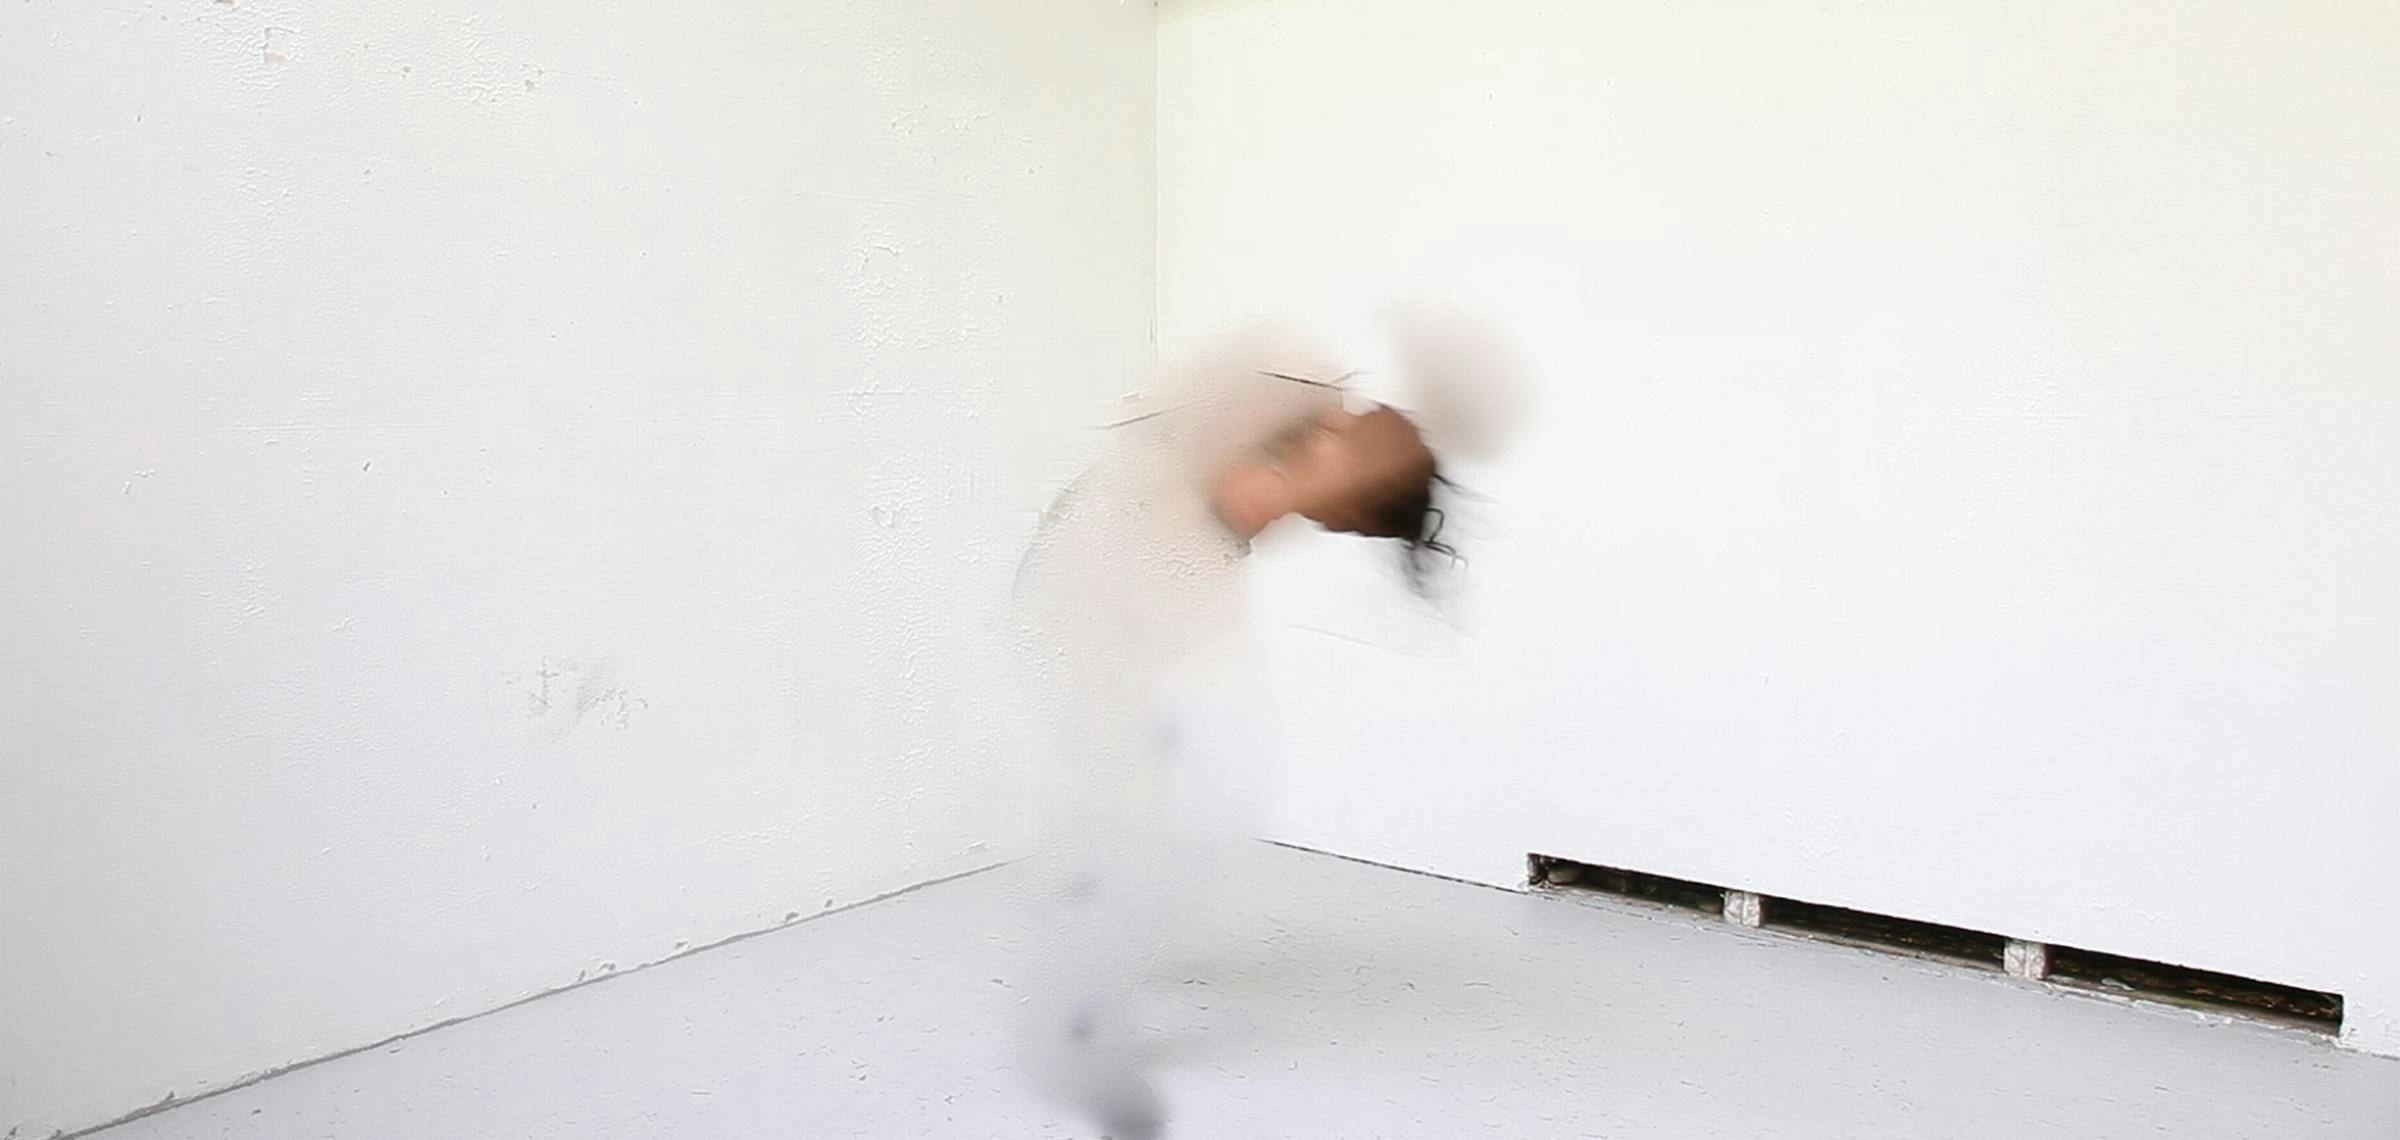 Image of an indistinct figure wearing all white dancing in a white gallery space